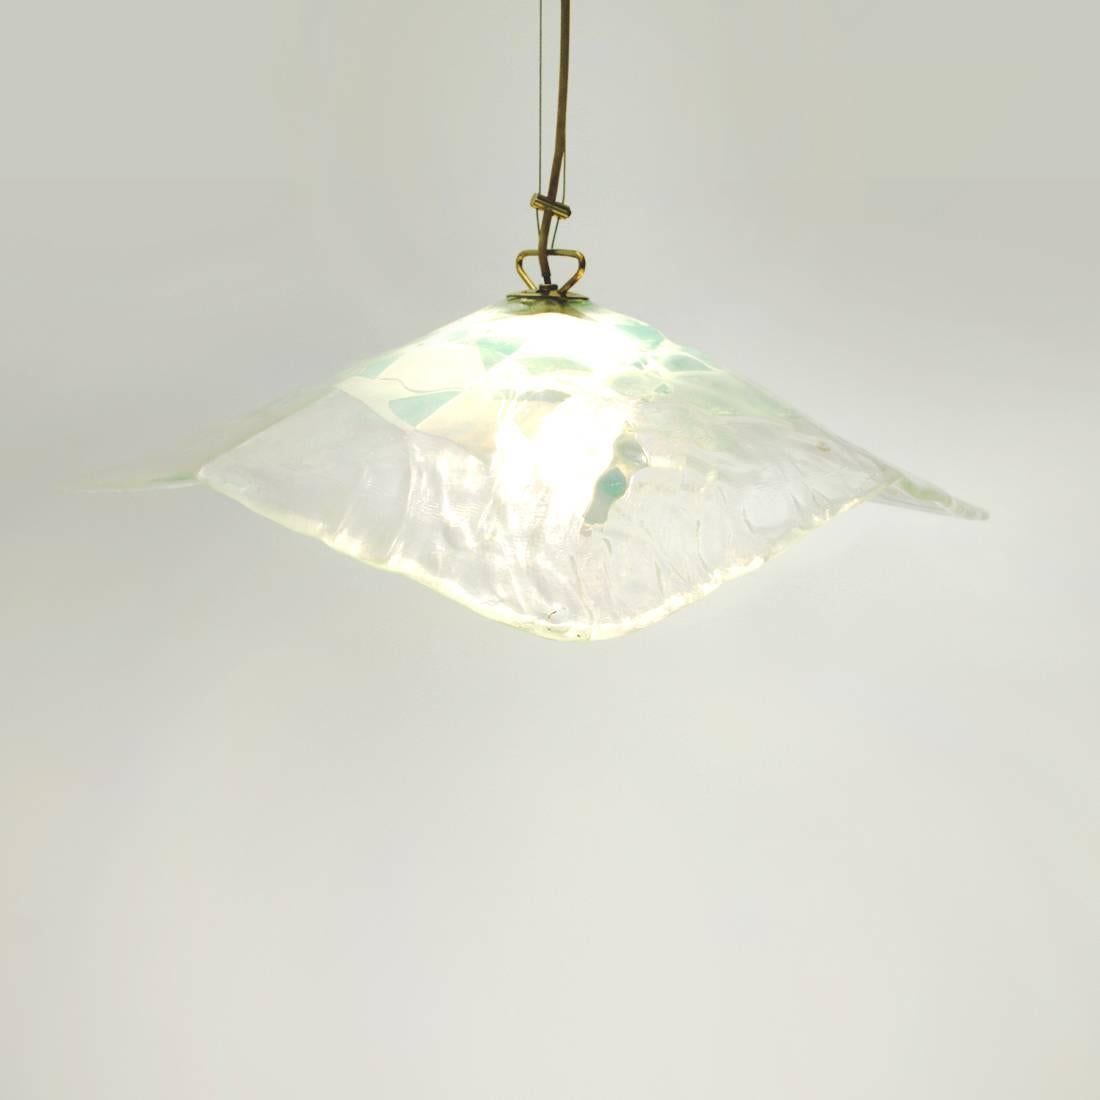 Chandelier produced by La Murrina in the 1970s.
Rosette, diffuser holder and small parts, in brass.
Diffuser in transparent Murano glass with green lagoon leaf.
Structure in good condition, some signs to normal use over time.

Dimensions: Width